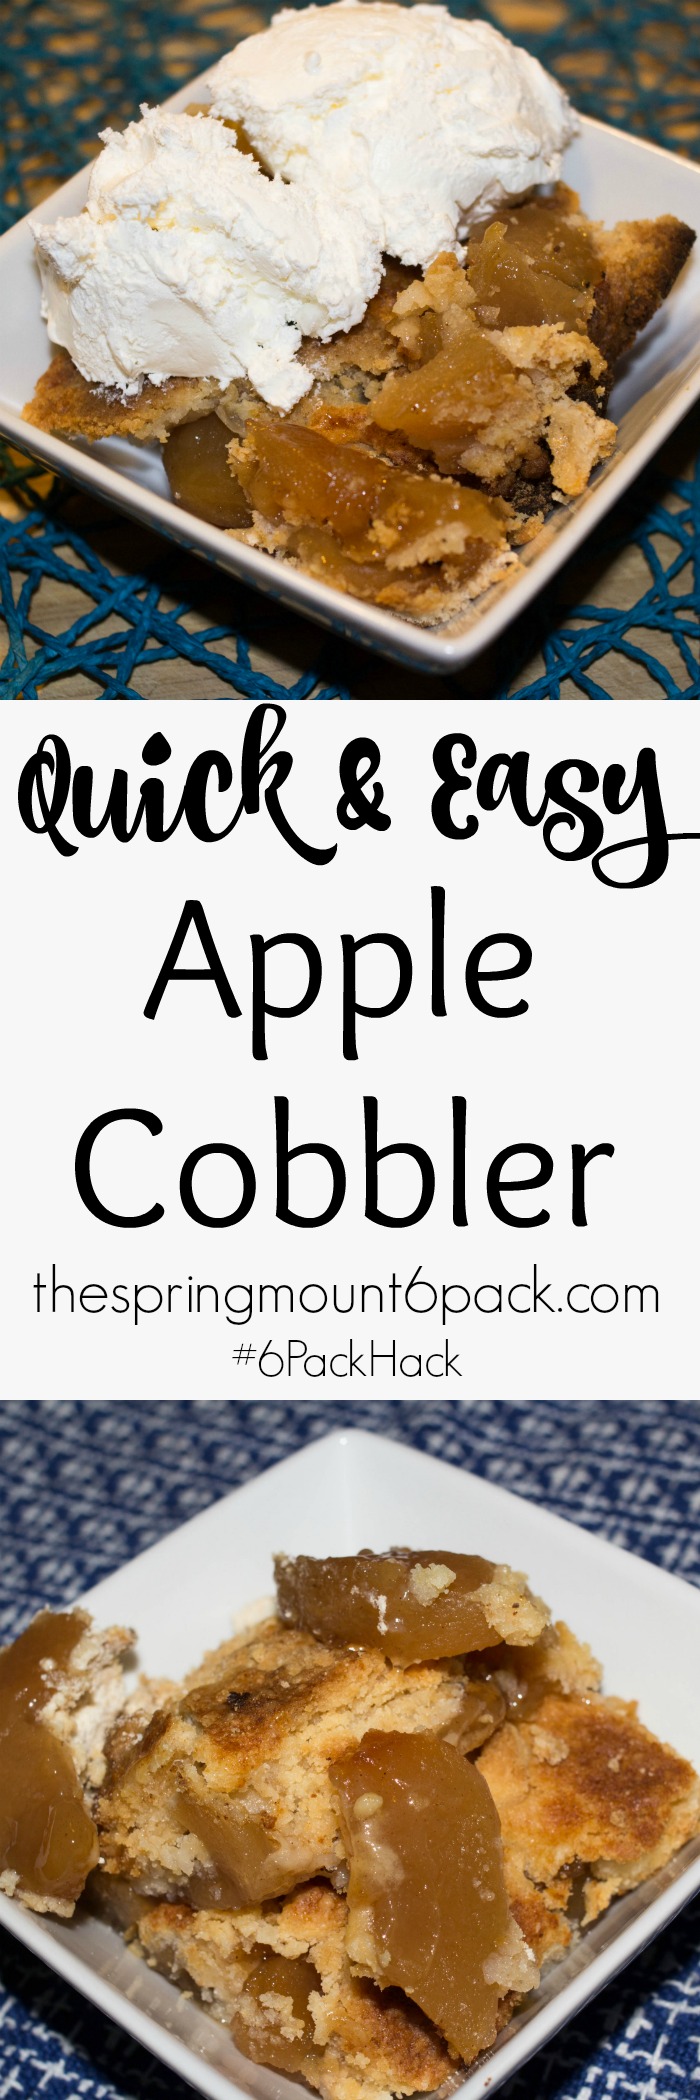 Looking for a recipe hack that makes life easier. Try this Hack Simple Apple Cobbler Recipe that is only 3 ingredients. It's guaranteed to disappear.